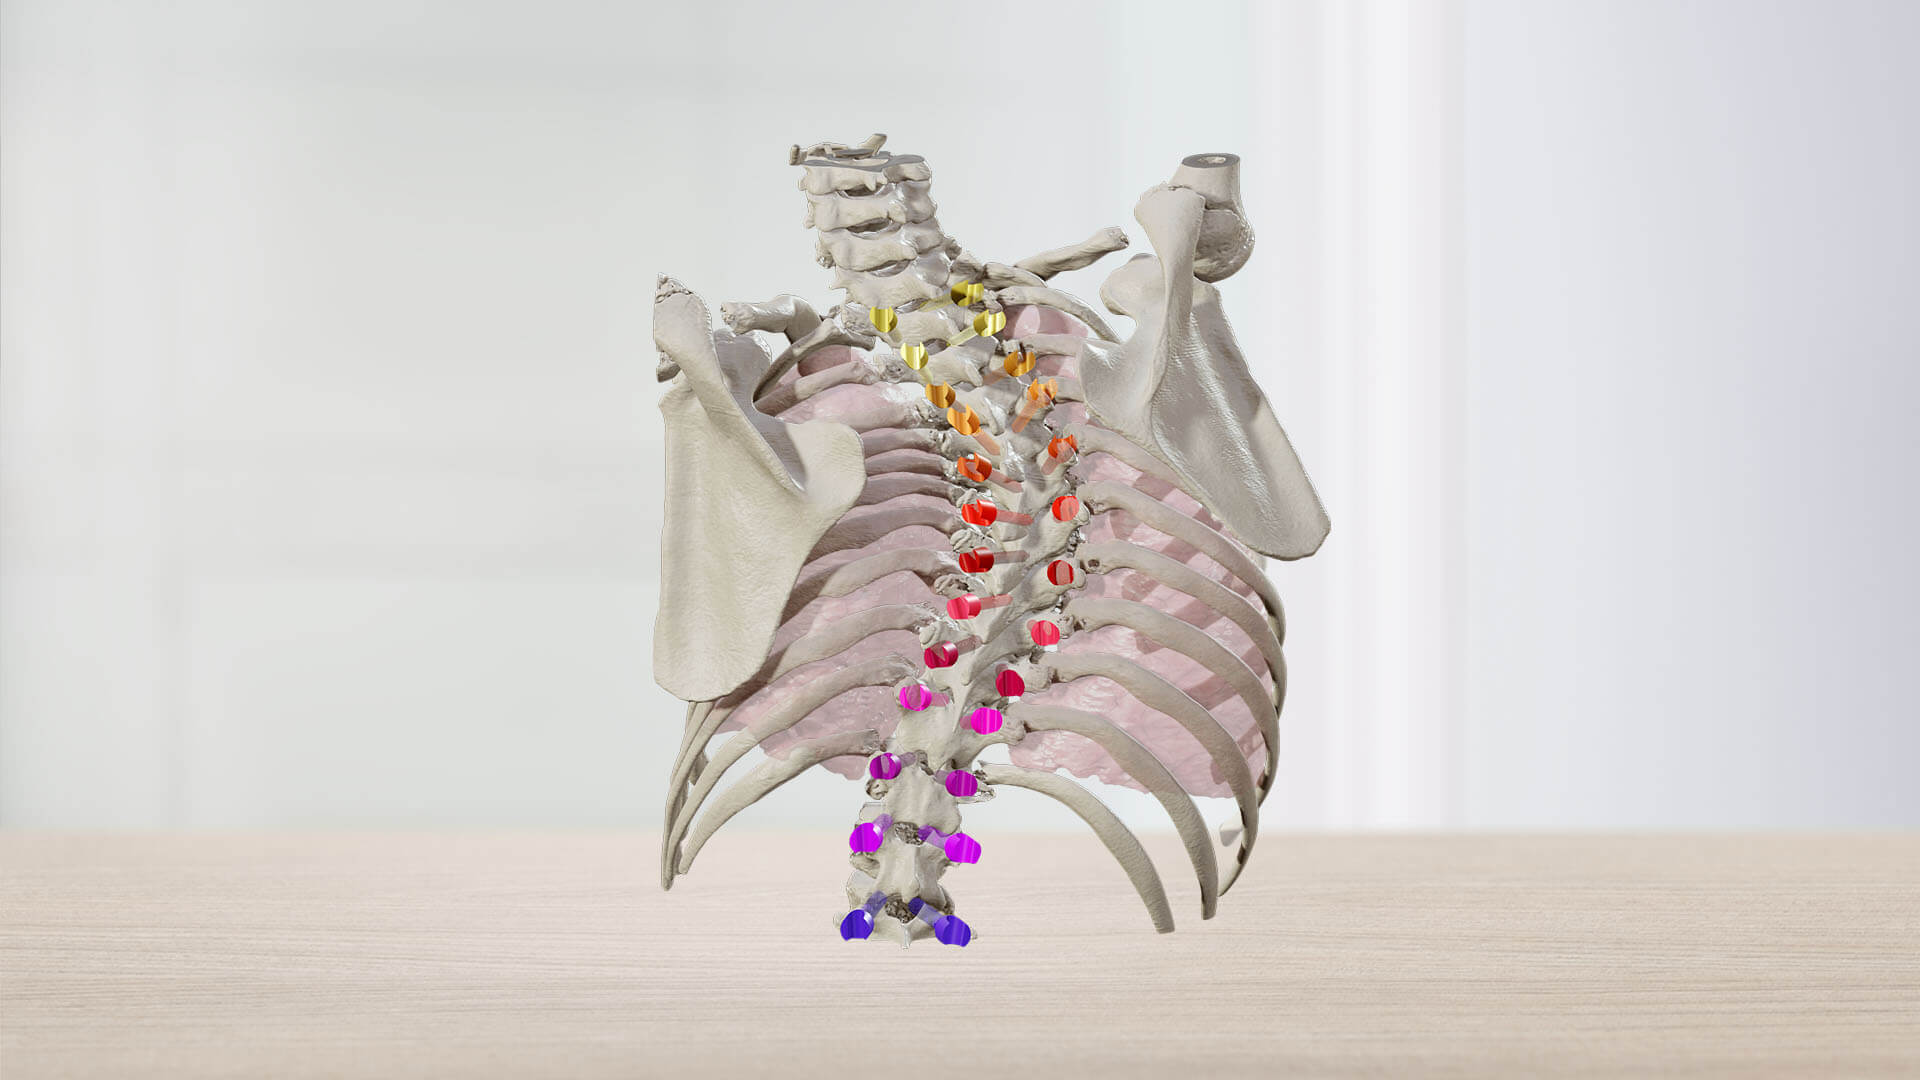 Showcasing the Mixed Reality Viewer for Spinal Indications